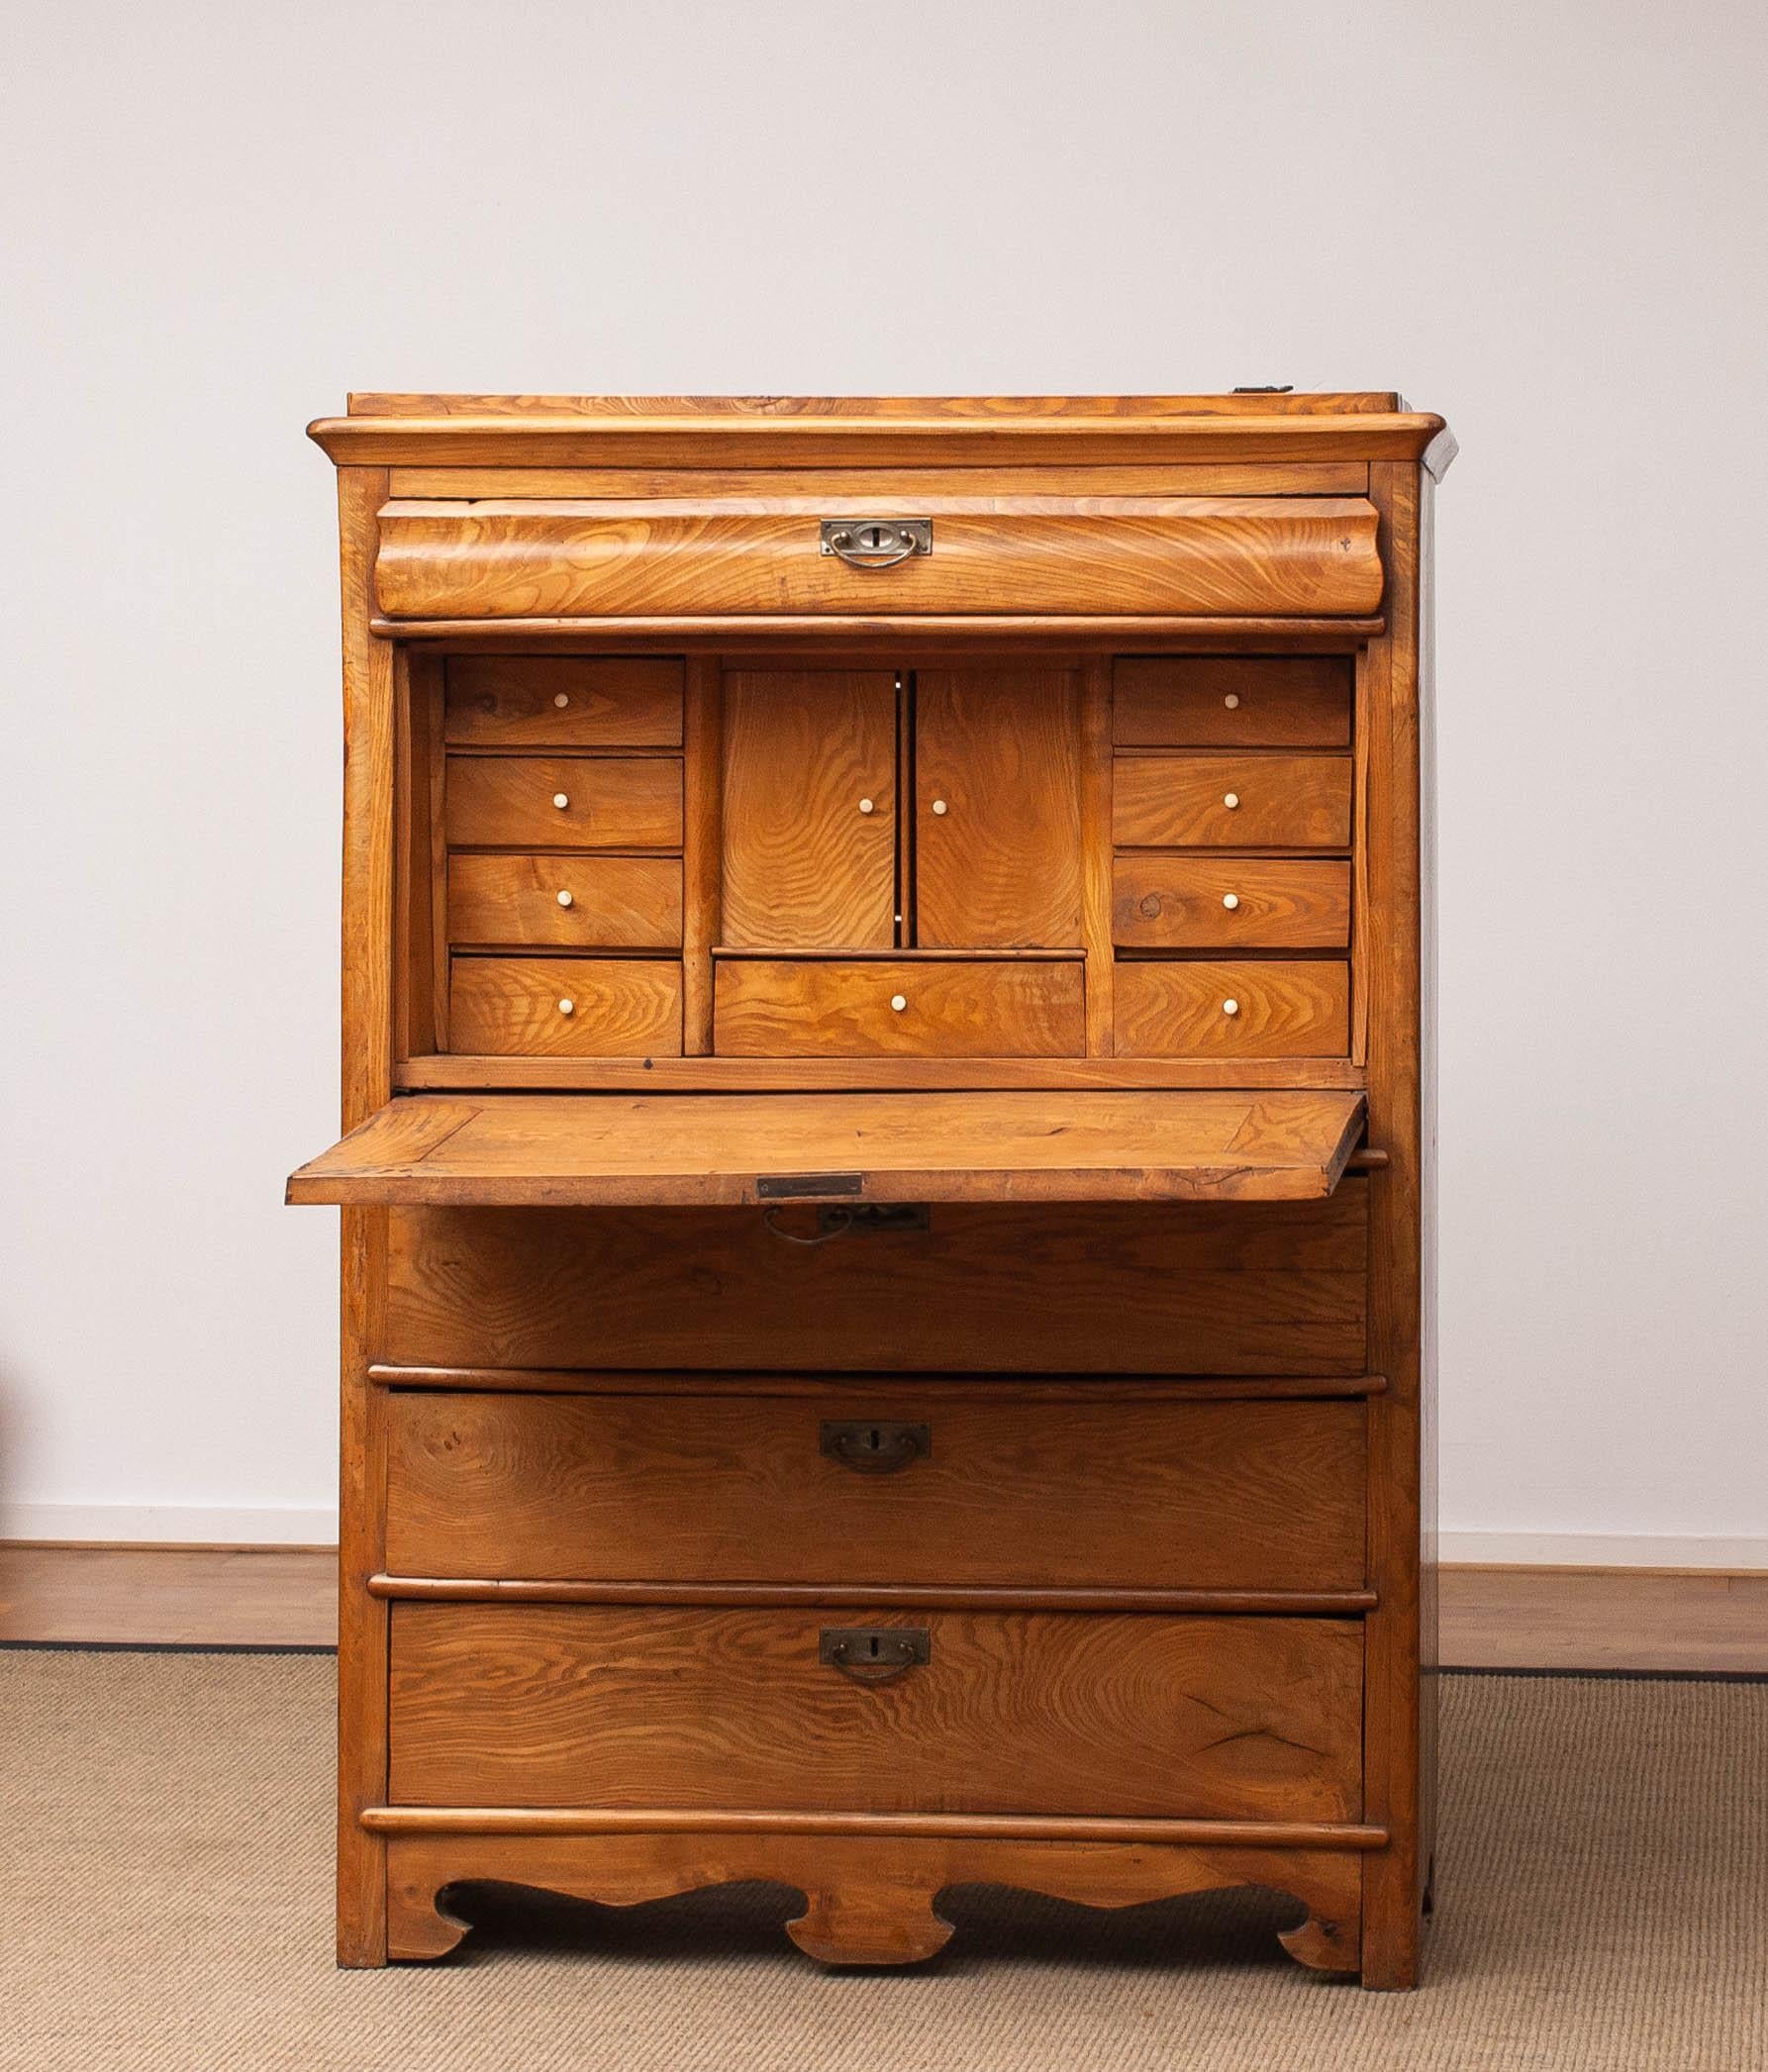 Beautiful and in fully original condition Swedish pine secretaire features rounded corners with a curved drawer on top and beneath a key-locked fall front, which opens to reveal a writing surface and a fitted Swedish pine interior. The interior is